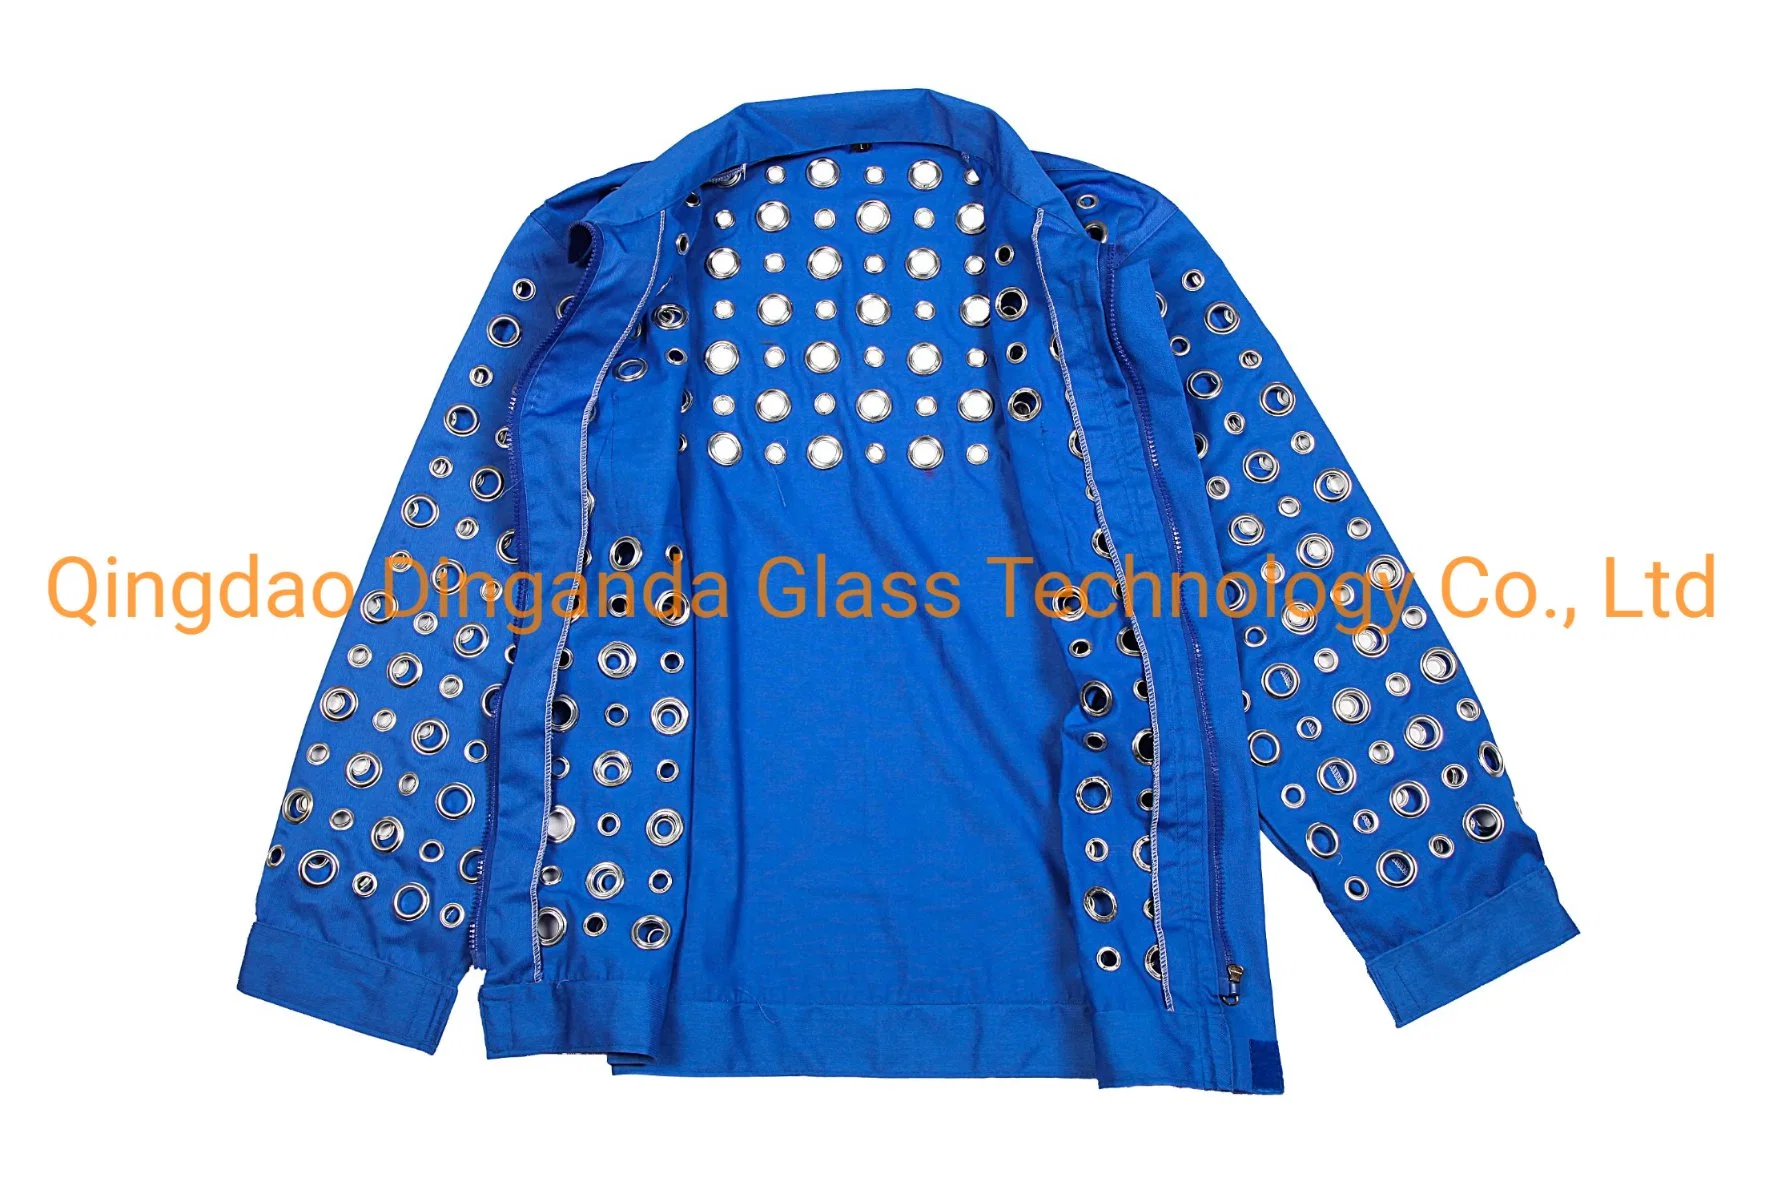 The Long-Sleeved Clothing Integrated Work Clothes Labor Protection Suit Anti Cutting Suit for Glass Factory